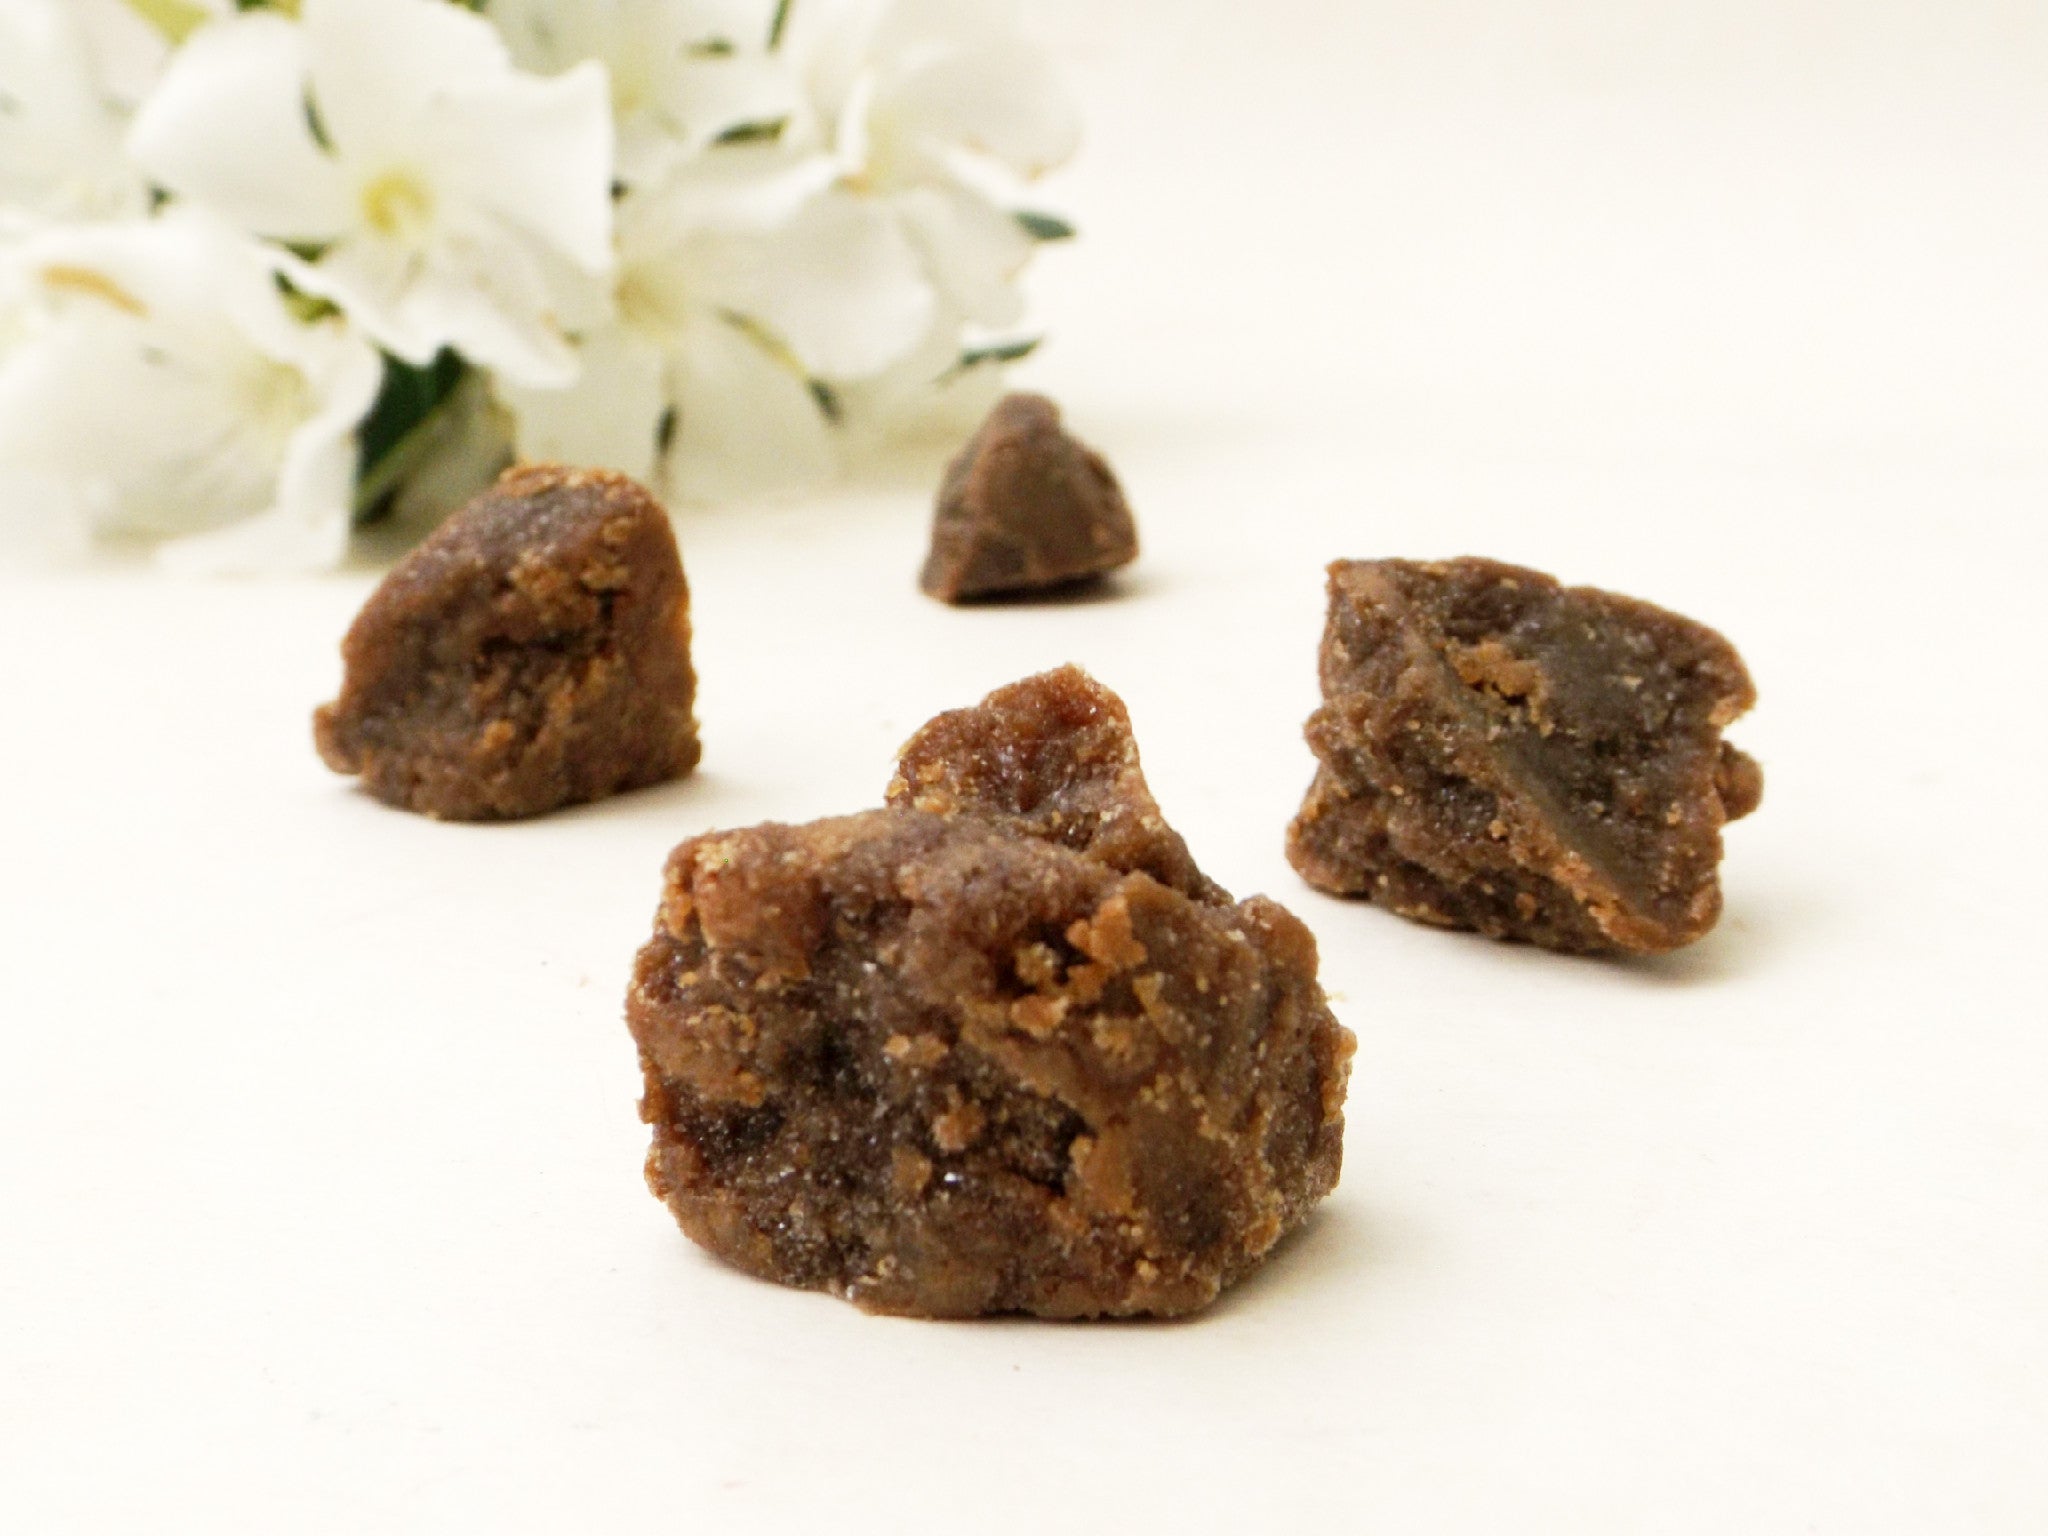 Musk Amber Resin, for Burning or Solid Perfume, 5 Grams